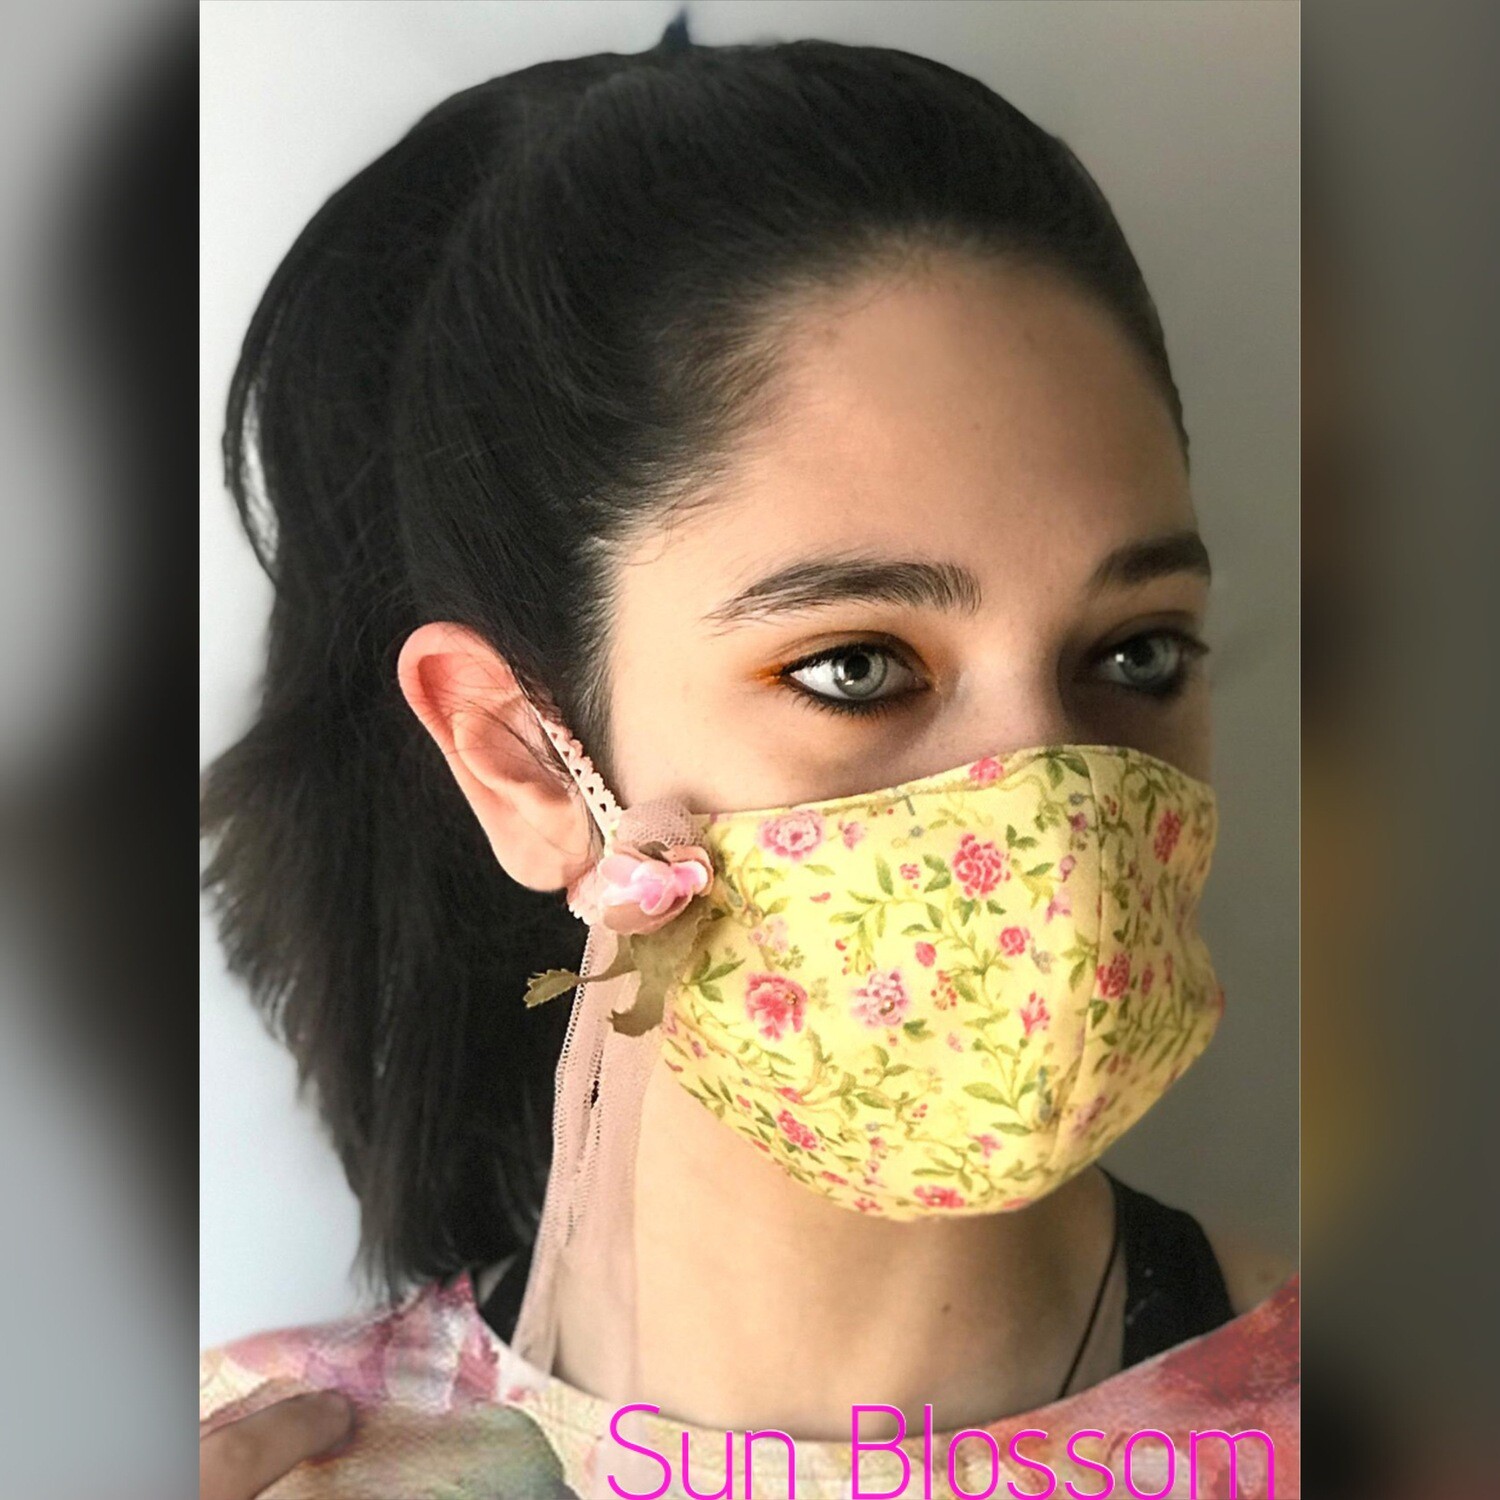 IPNG: Pansy Crush Fairytale Mask